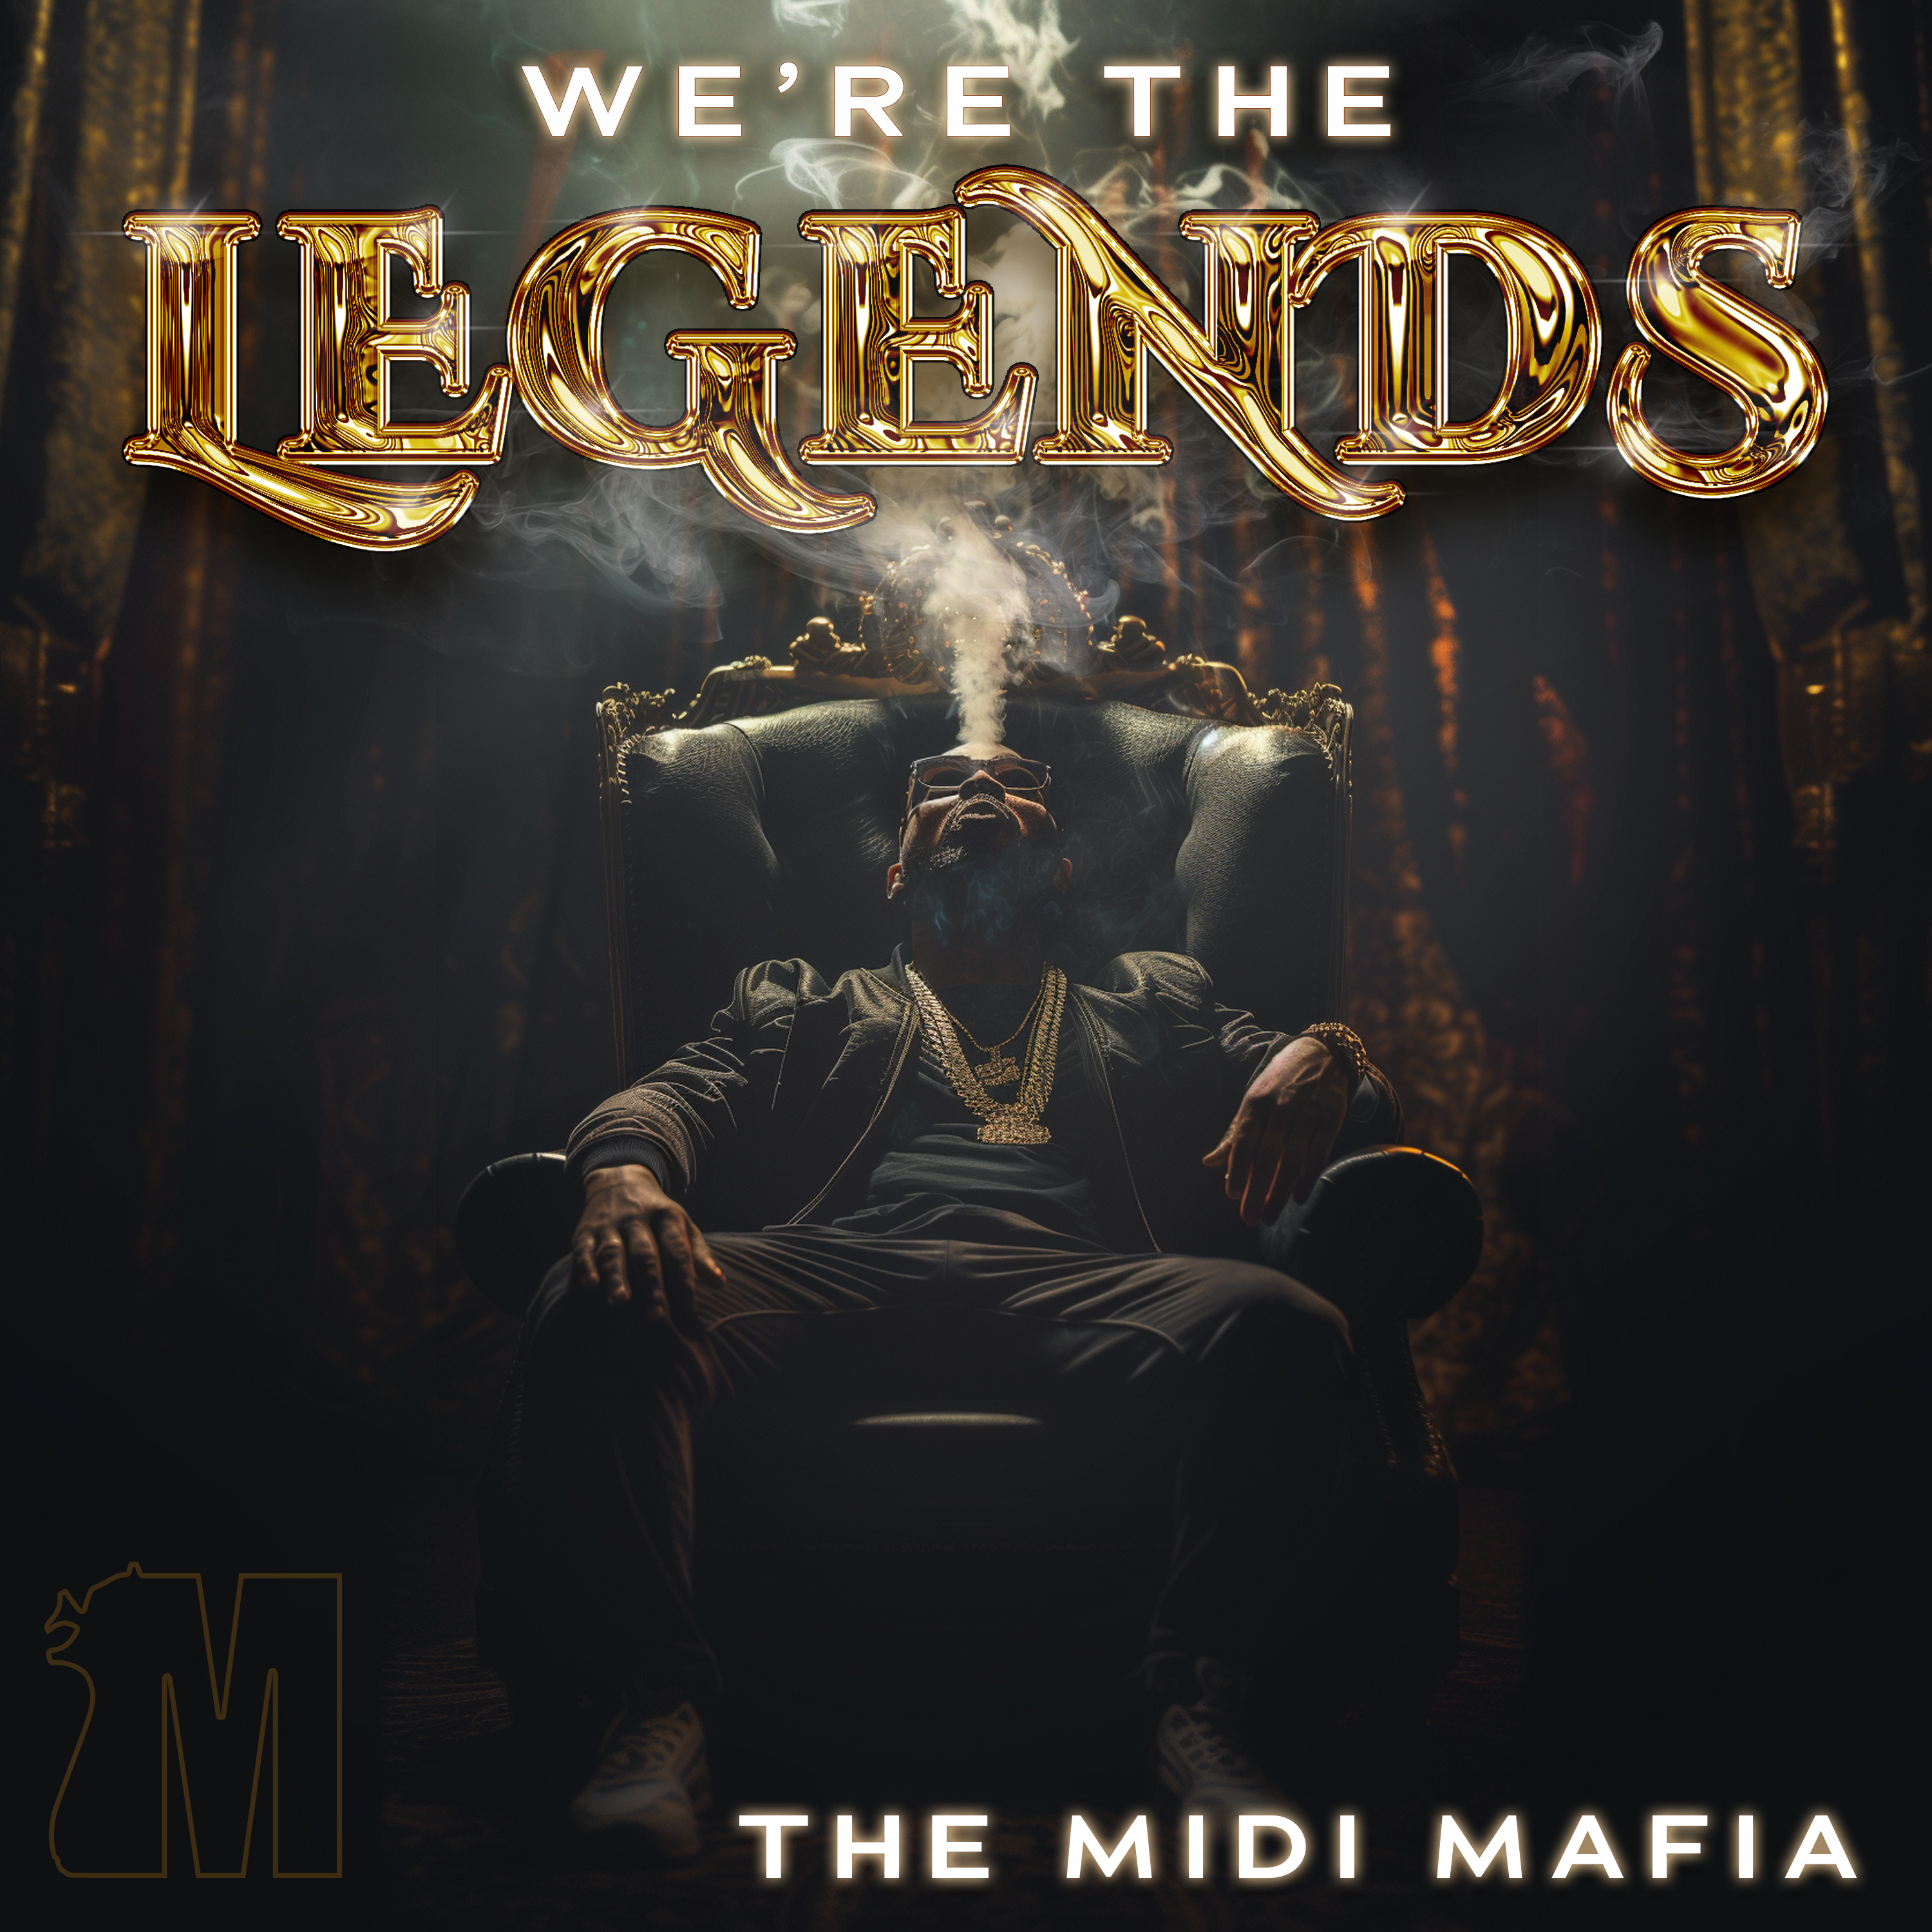 WE'RE THE LEGENDS (FT. THE MIDI MAFIA, CHEL STRONG, MAXTON WALLER)